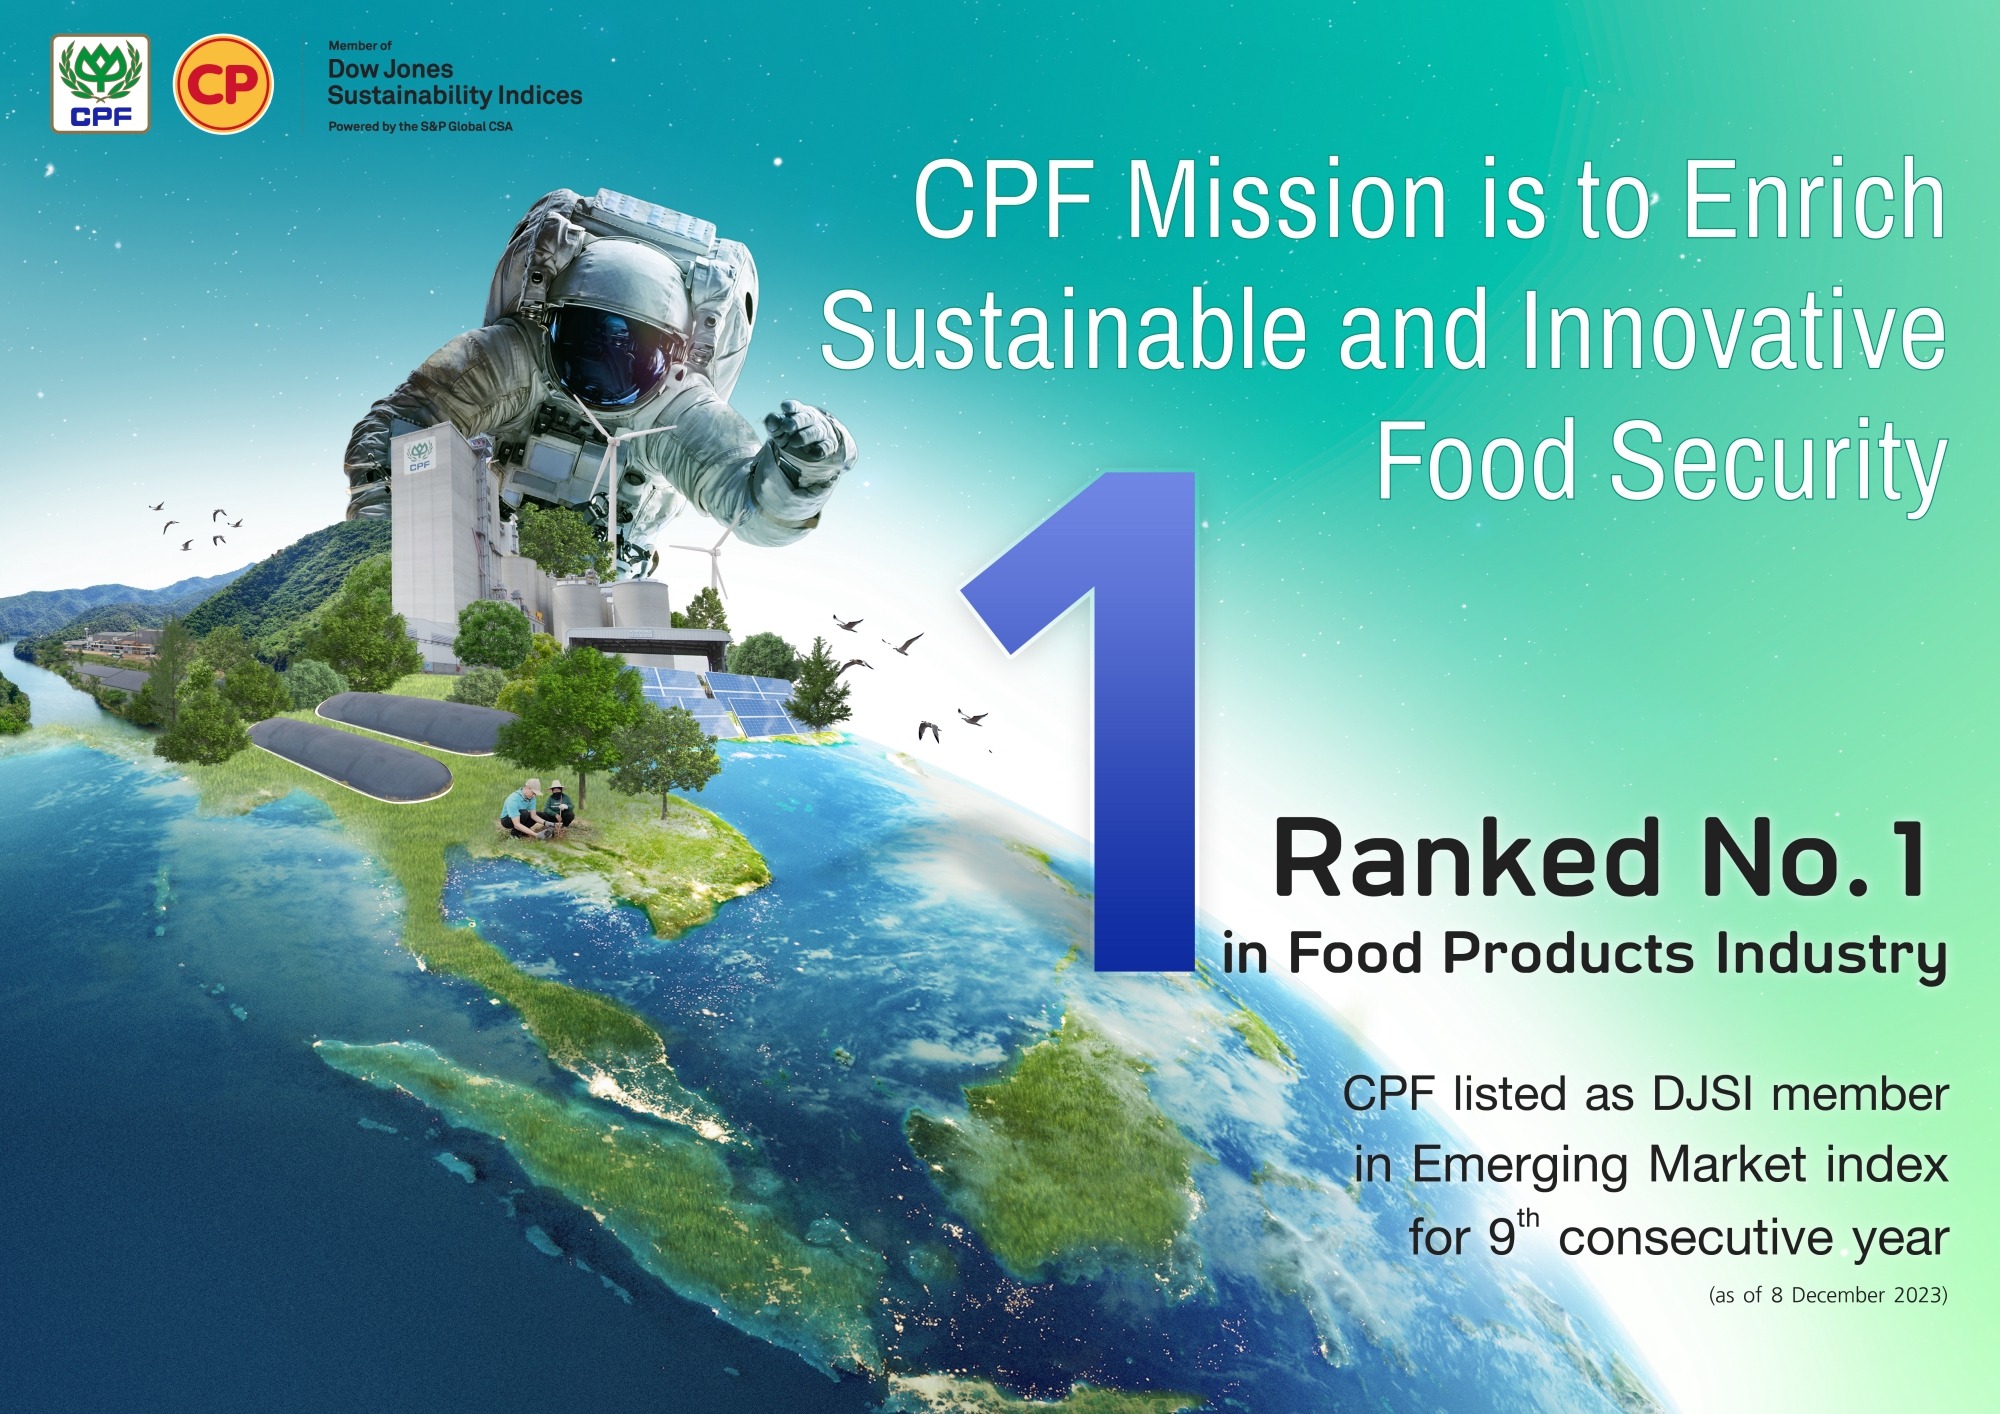 CP Foods ranked first in the 2023 DJSI Index, upholding its position as the leading global sustainable company in the food products sector